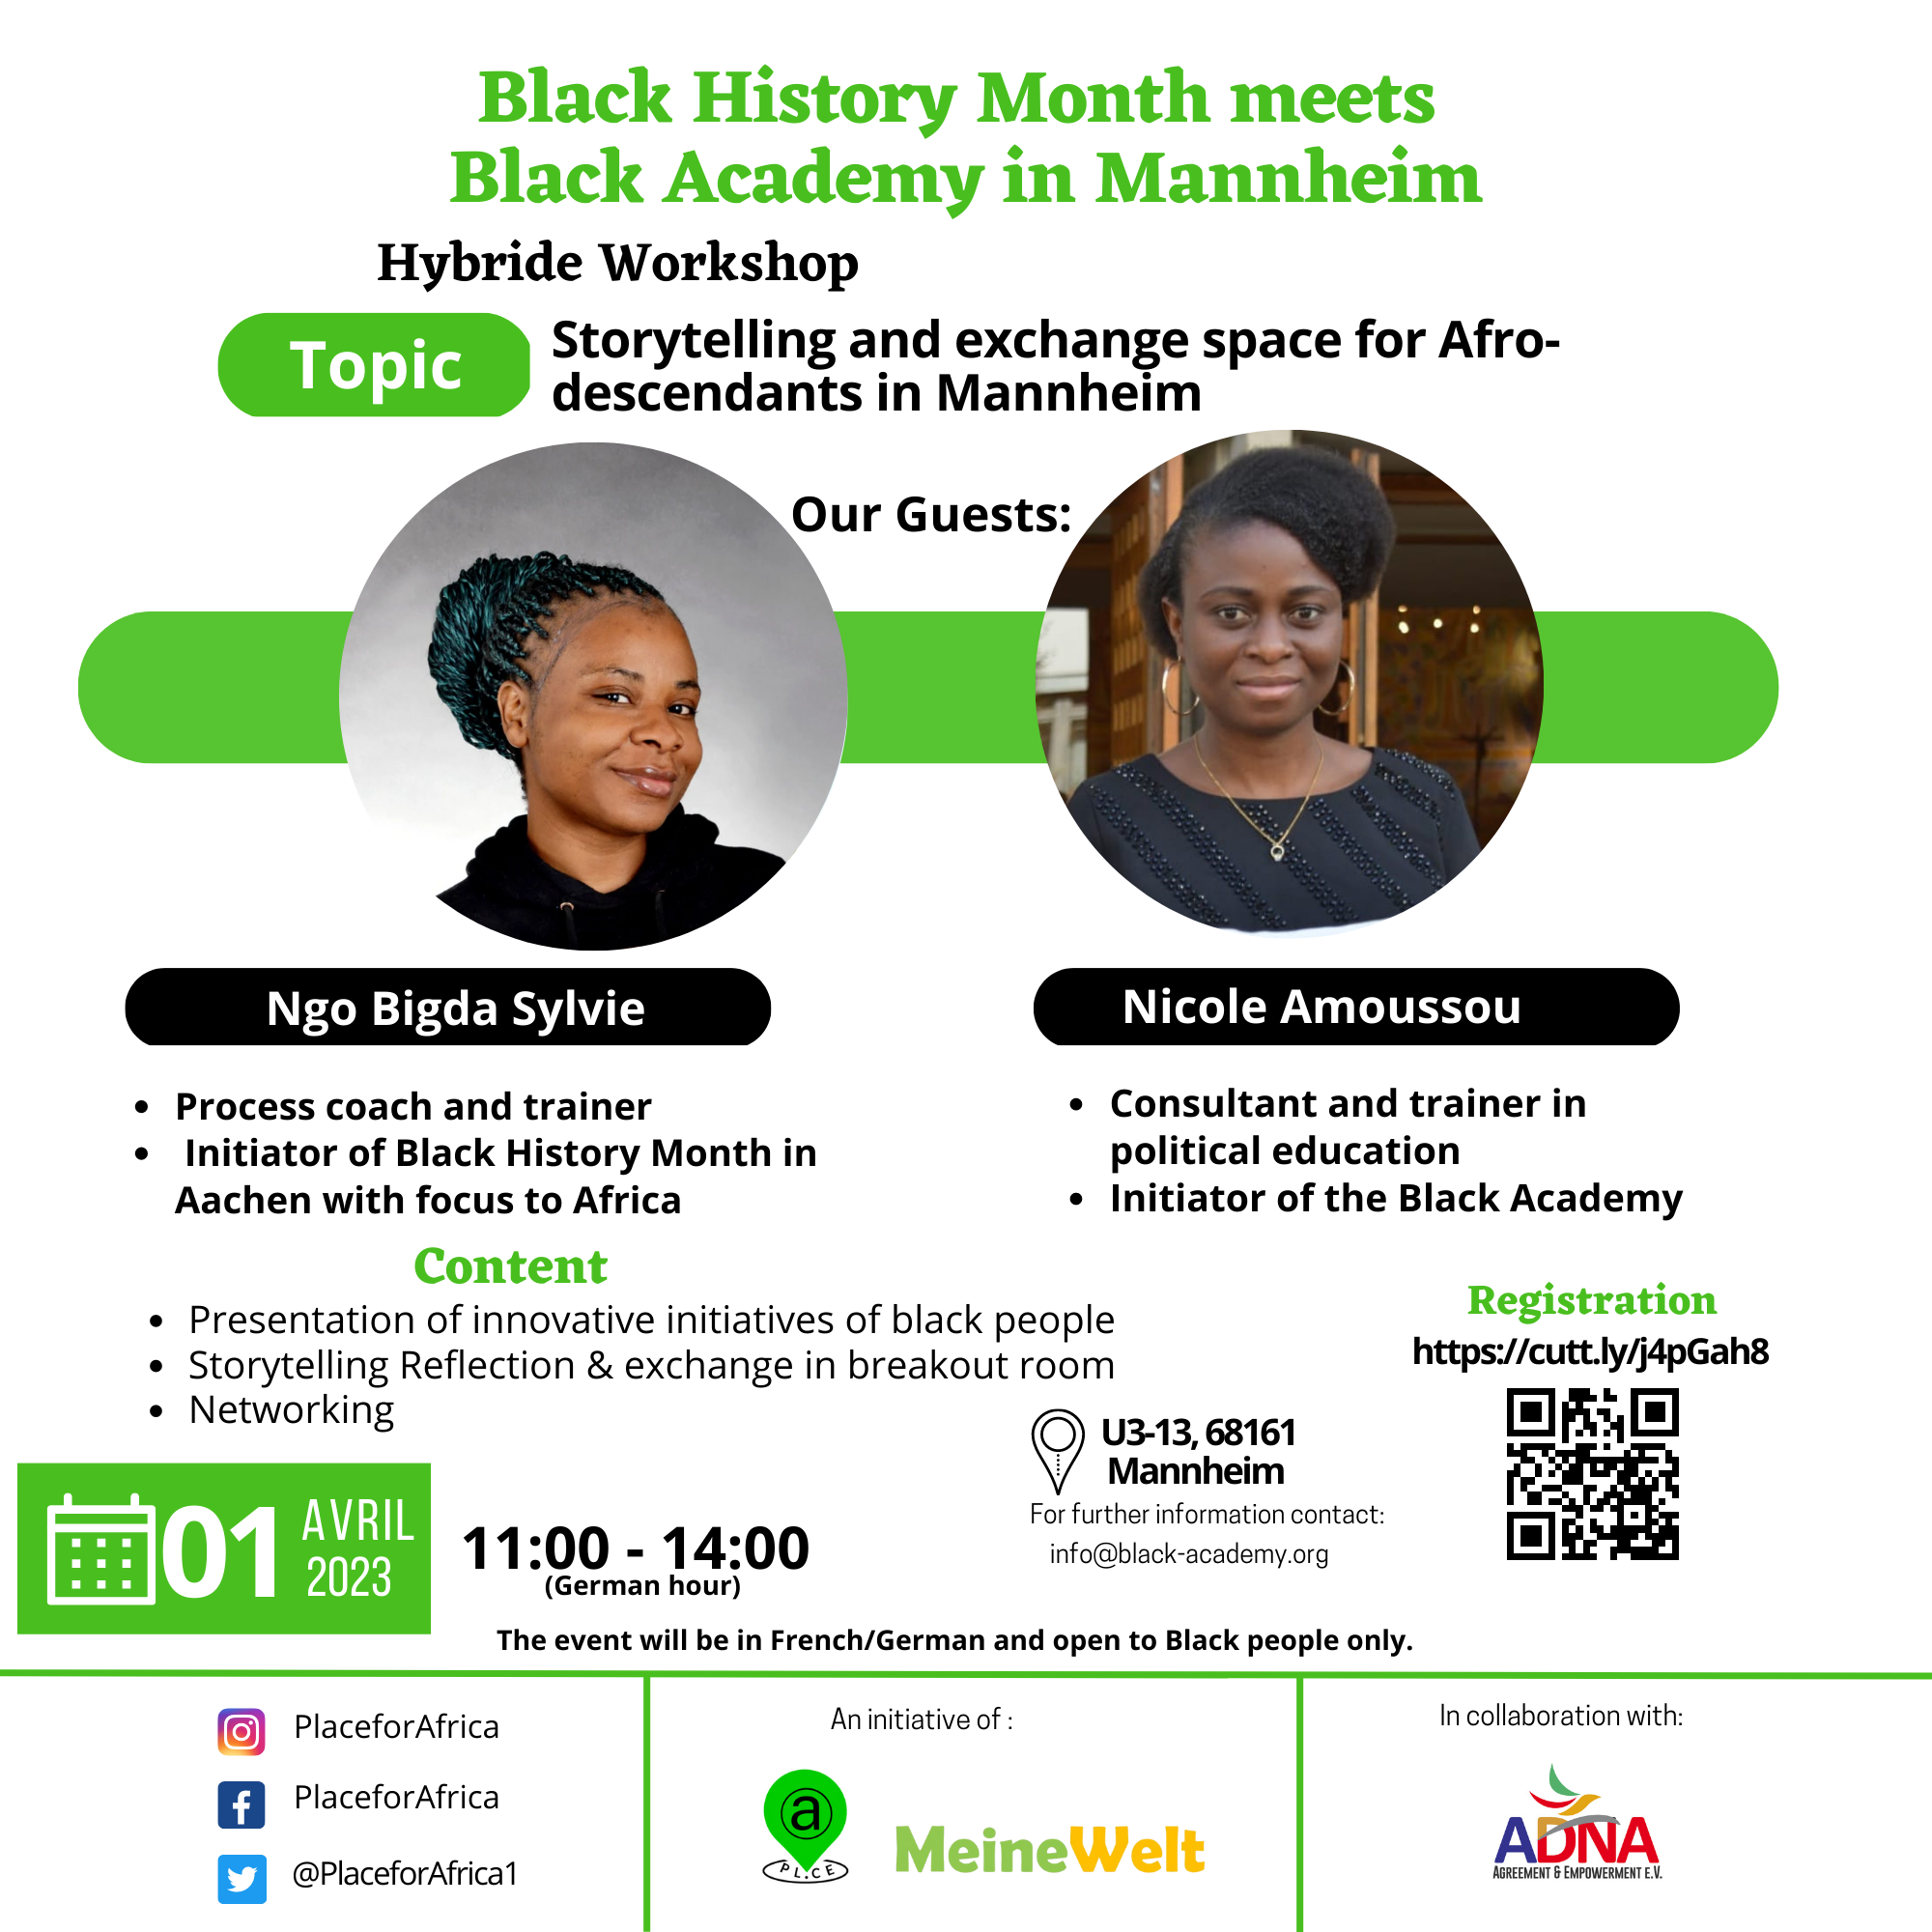 Visibility of Black People’s Competences and Innovative Initiatives in Mannheim